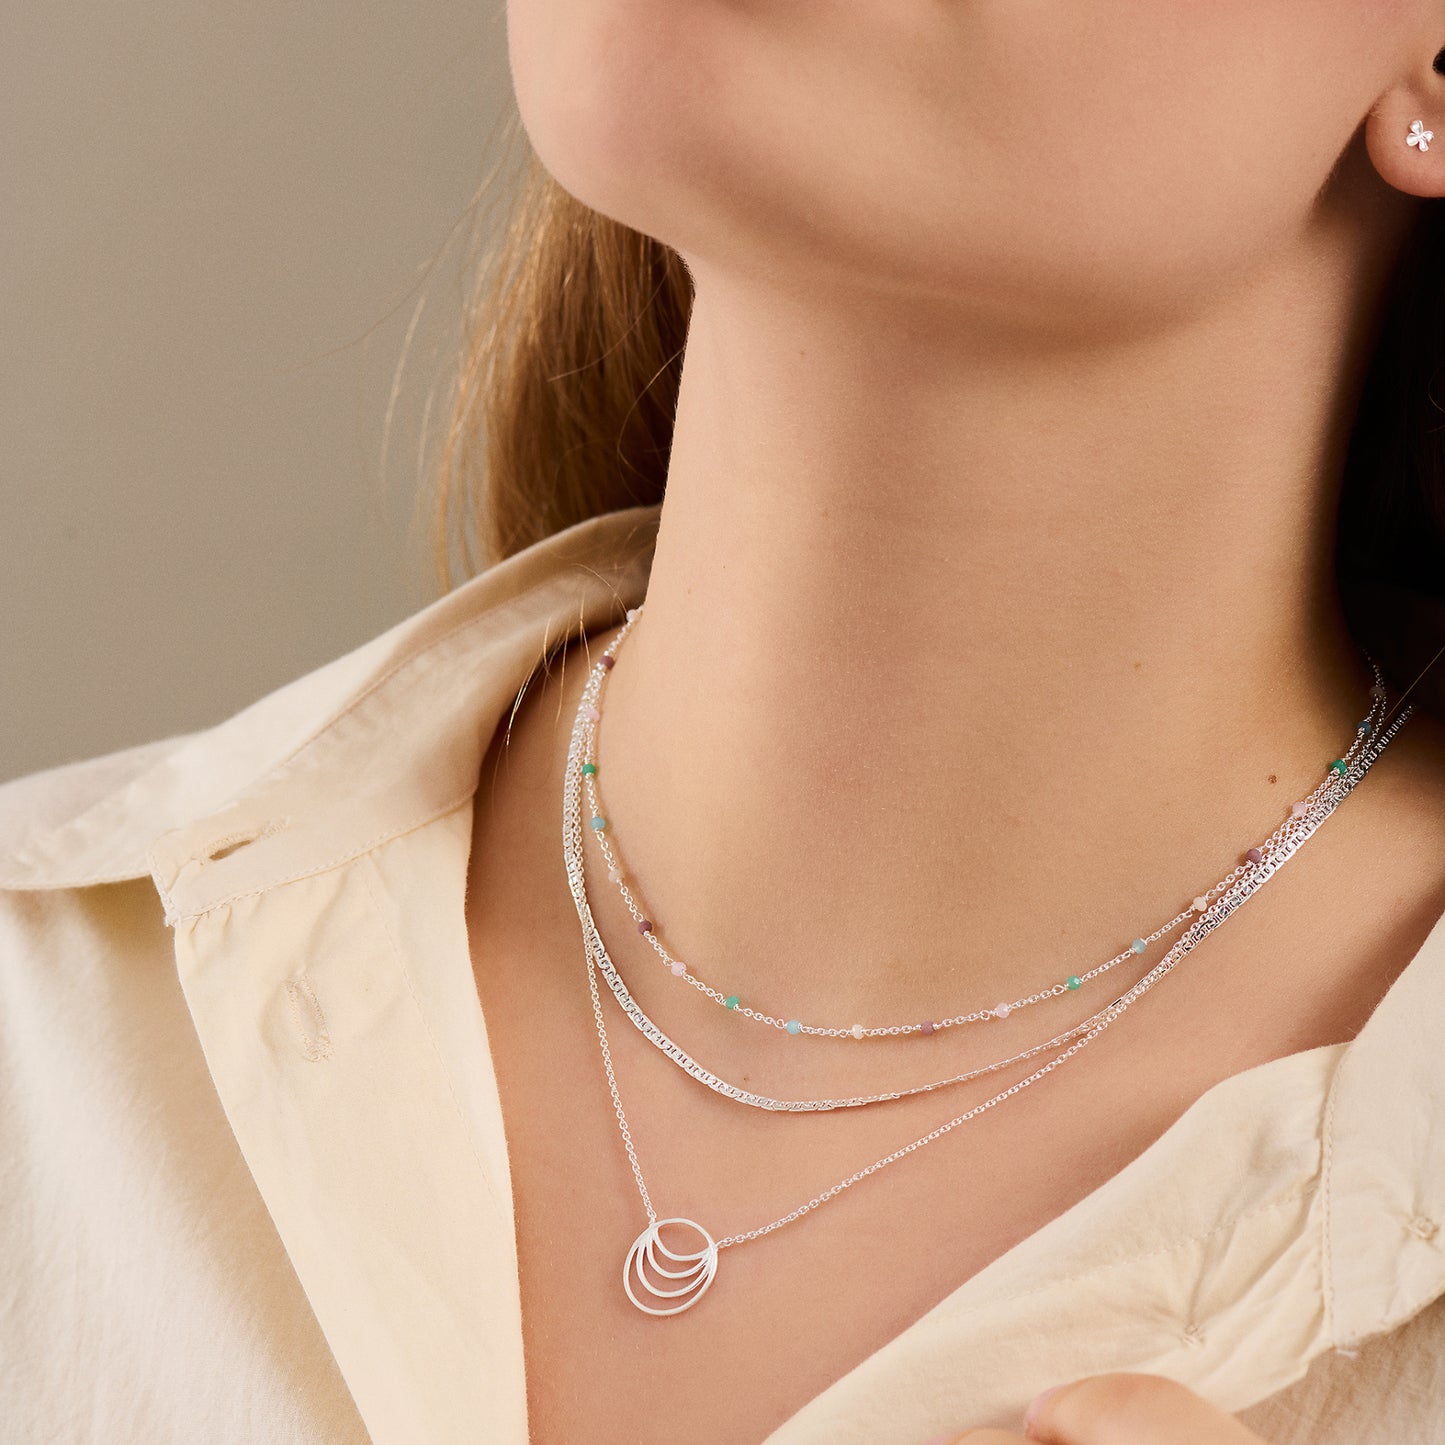 Therese necklace silver